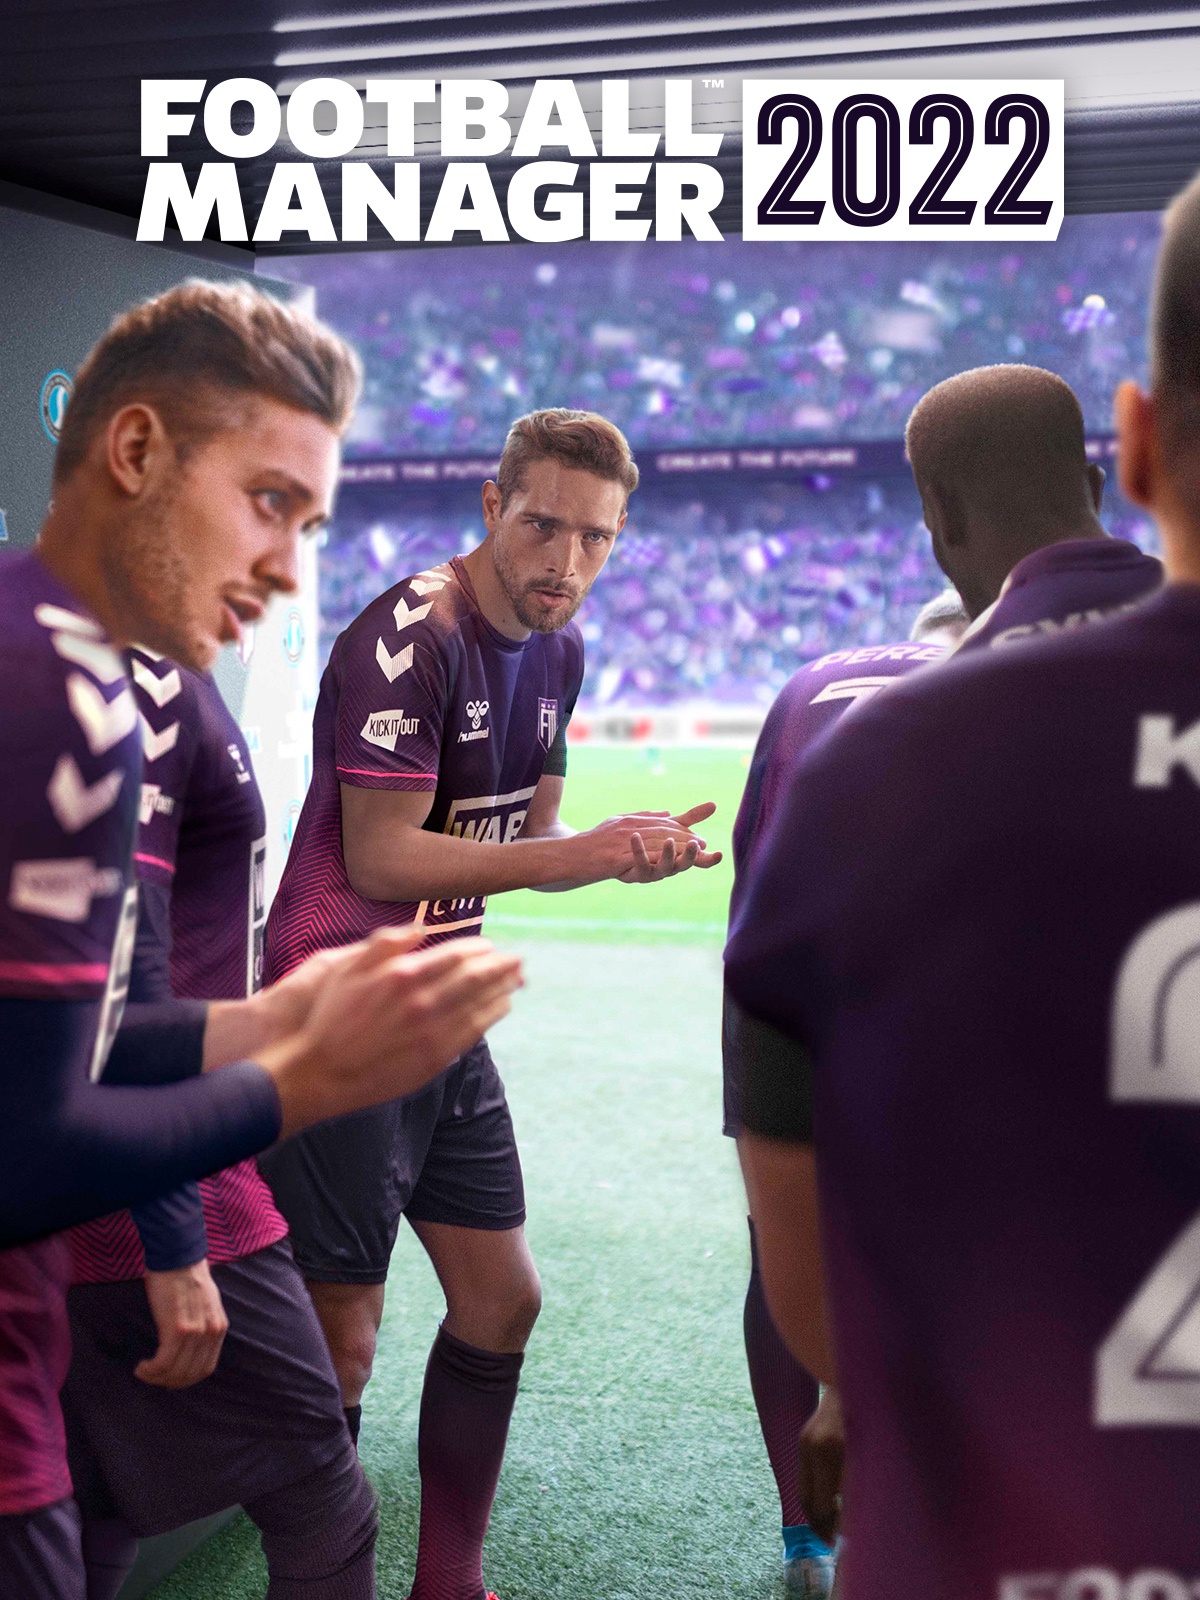 🥕🥕FOOTBALL MANAGER 2022+ Editor⚽Steam⚽ACCOUNT🥕🥕